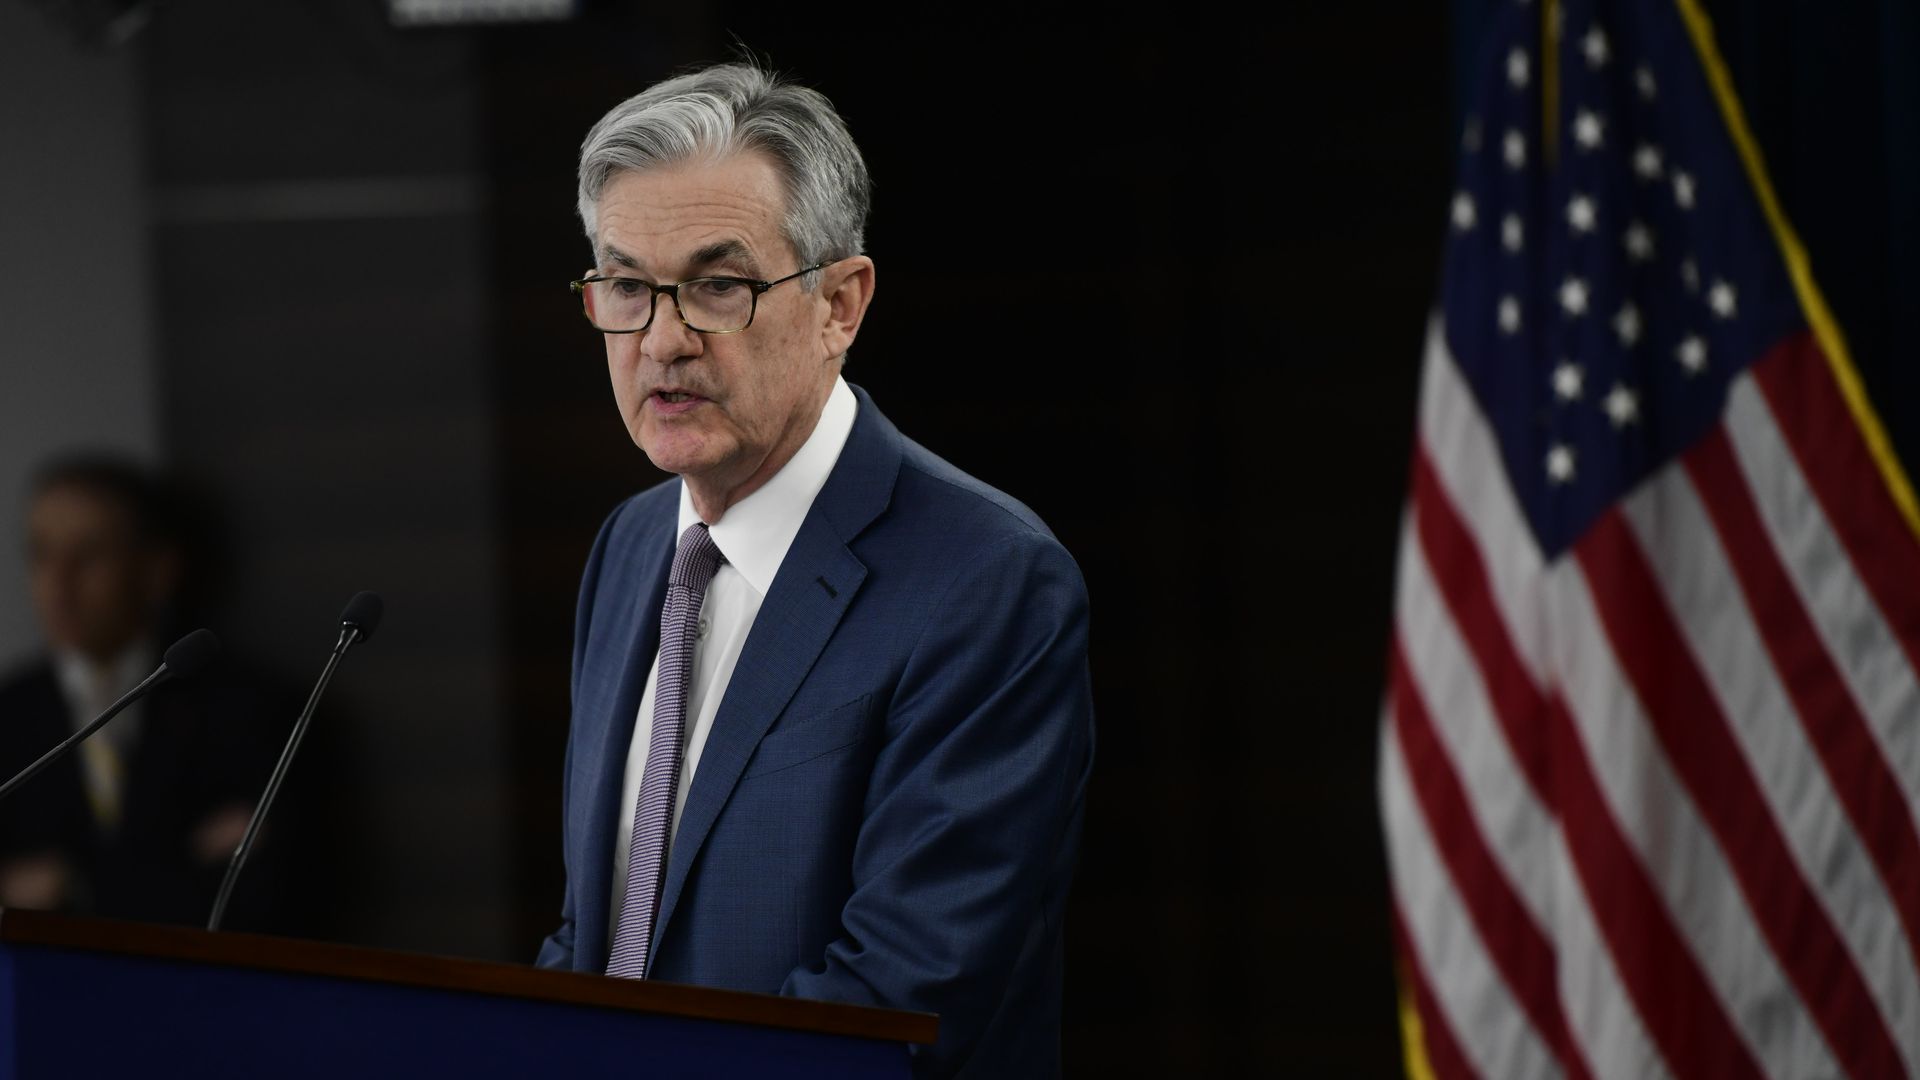 Federal Reserve Chair Jerome H. Powell speaking at a podium